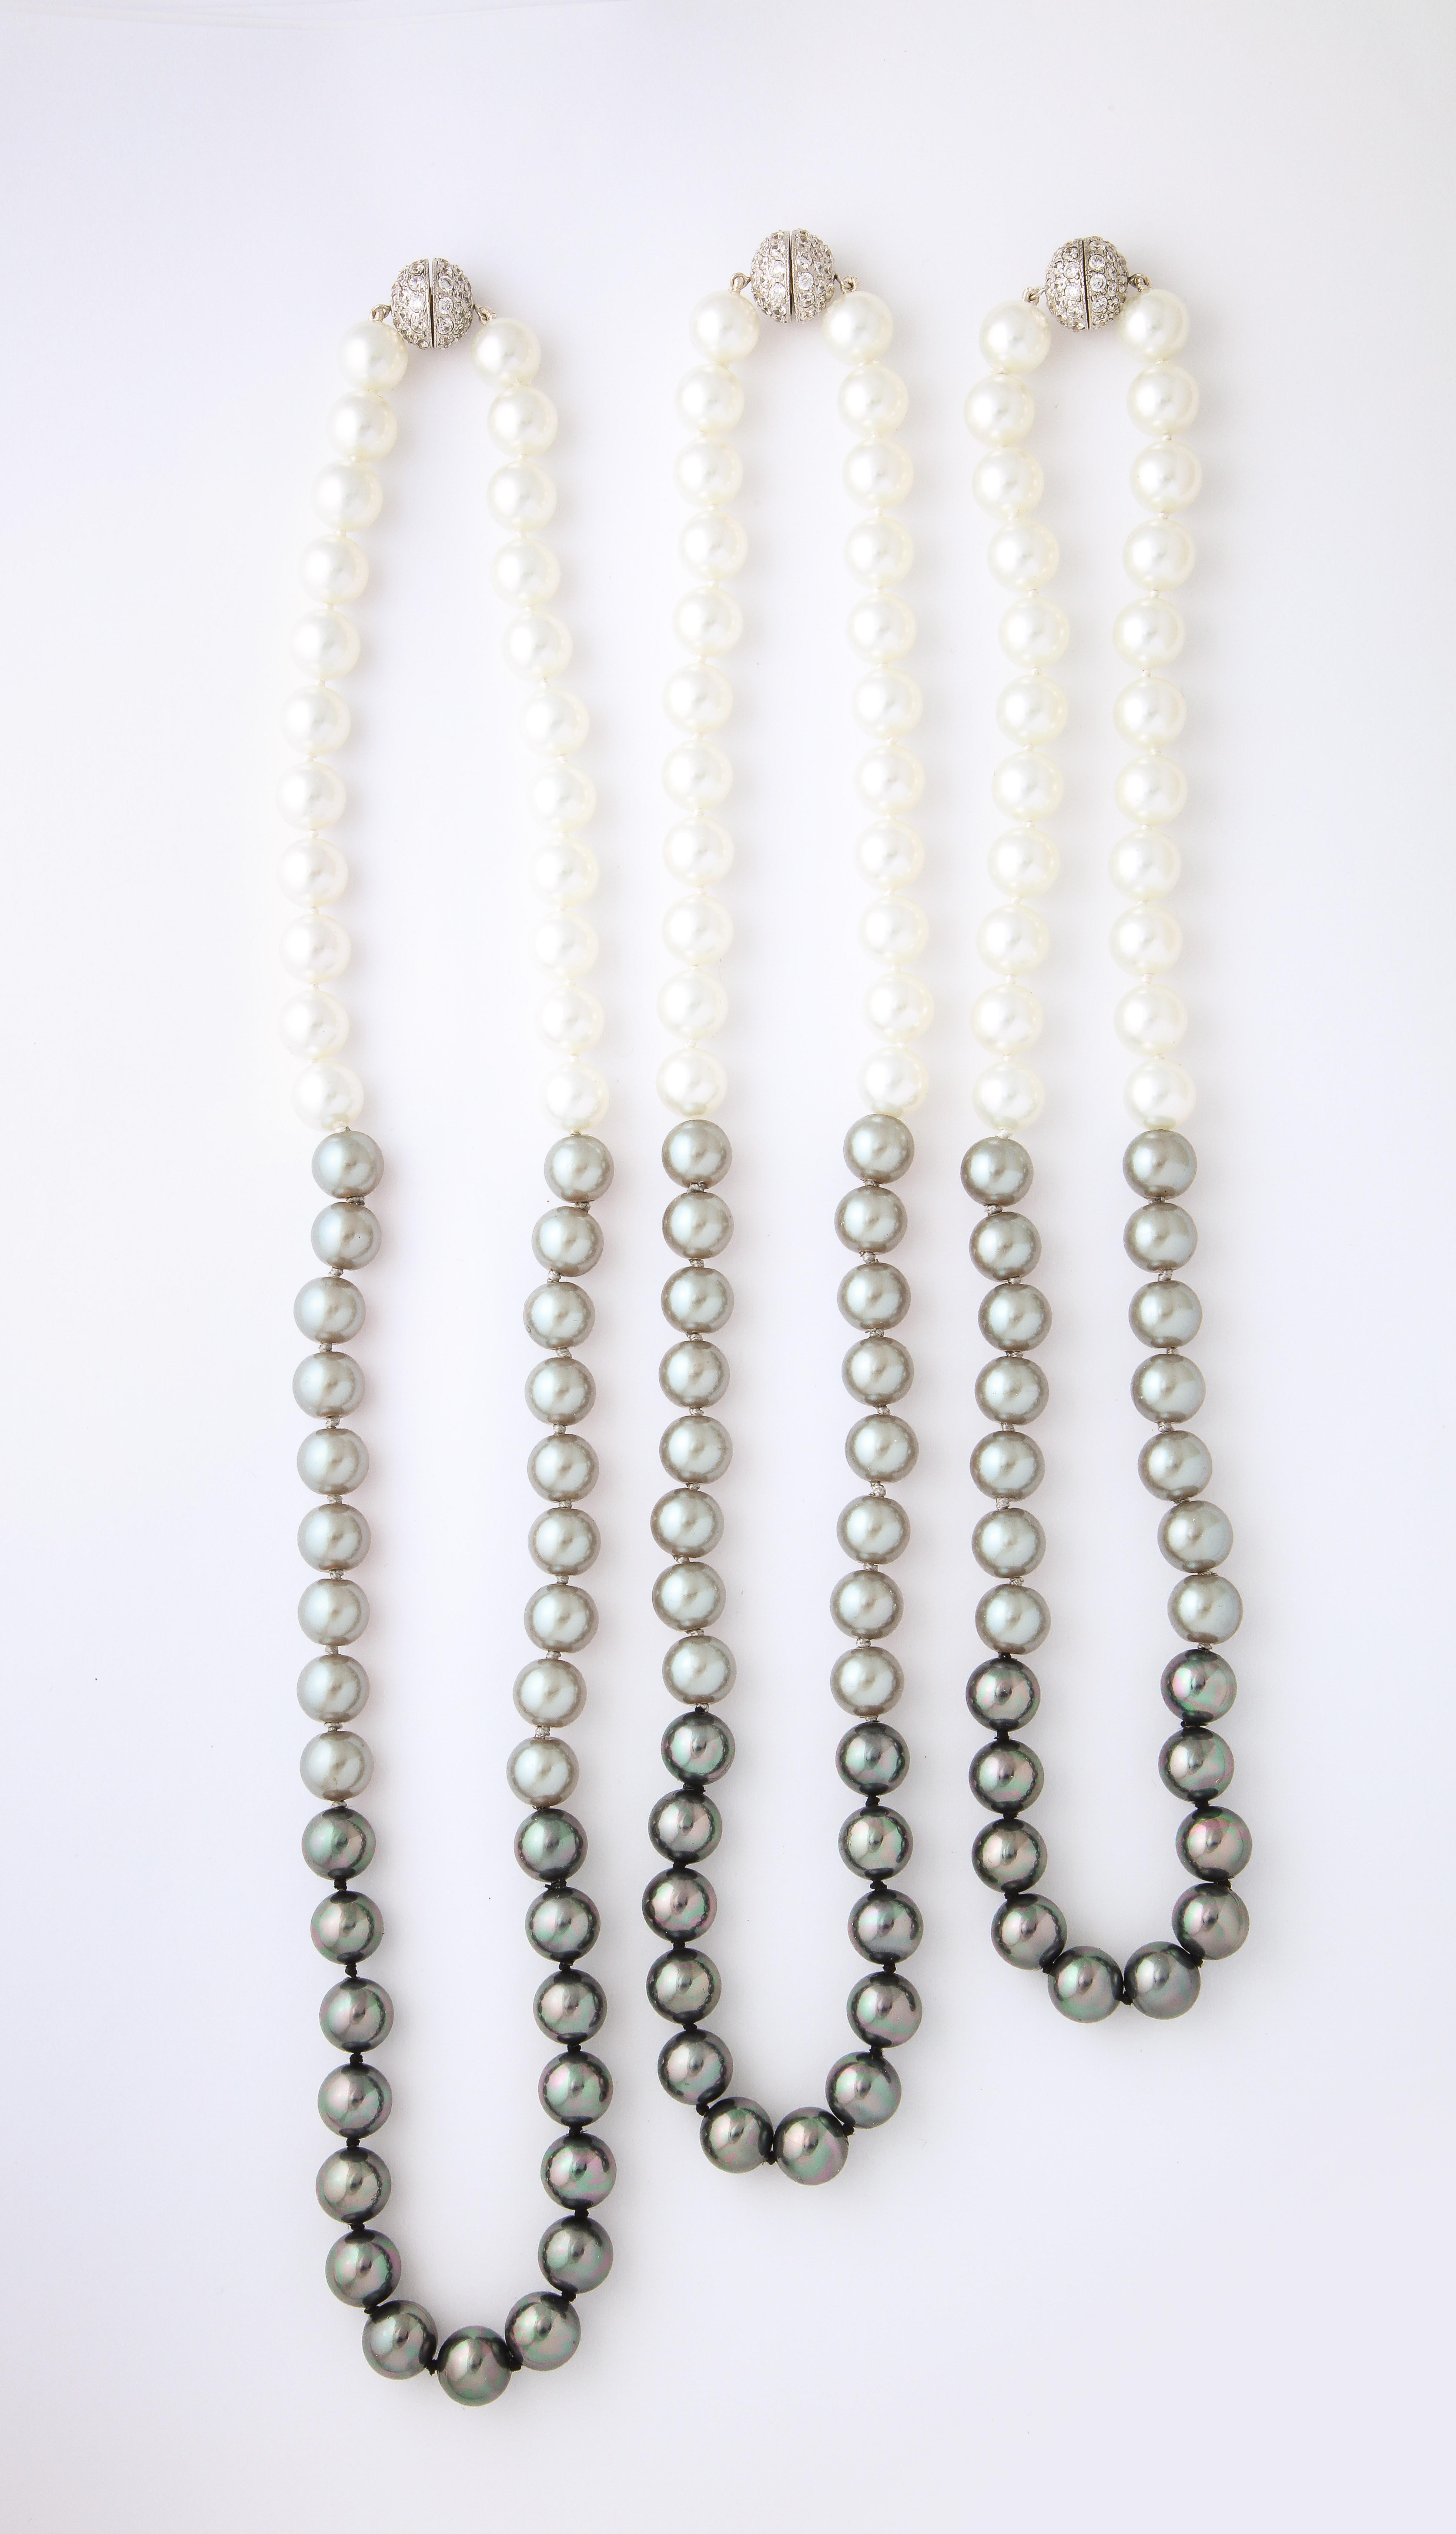 Atemberaubende 3 Single Rows Shaded 10MM Südsee Faux Pearls Necklace Mint Never Worn CZ Set Sterling Ball Clasps Can Be Worn As You Like-One, Two, Three. Atemberaubender Chic-Look
24Zoll, 26Zoll und 28Zoll